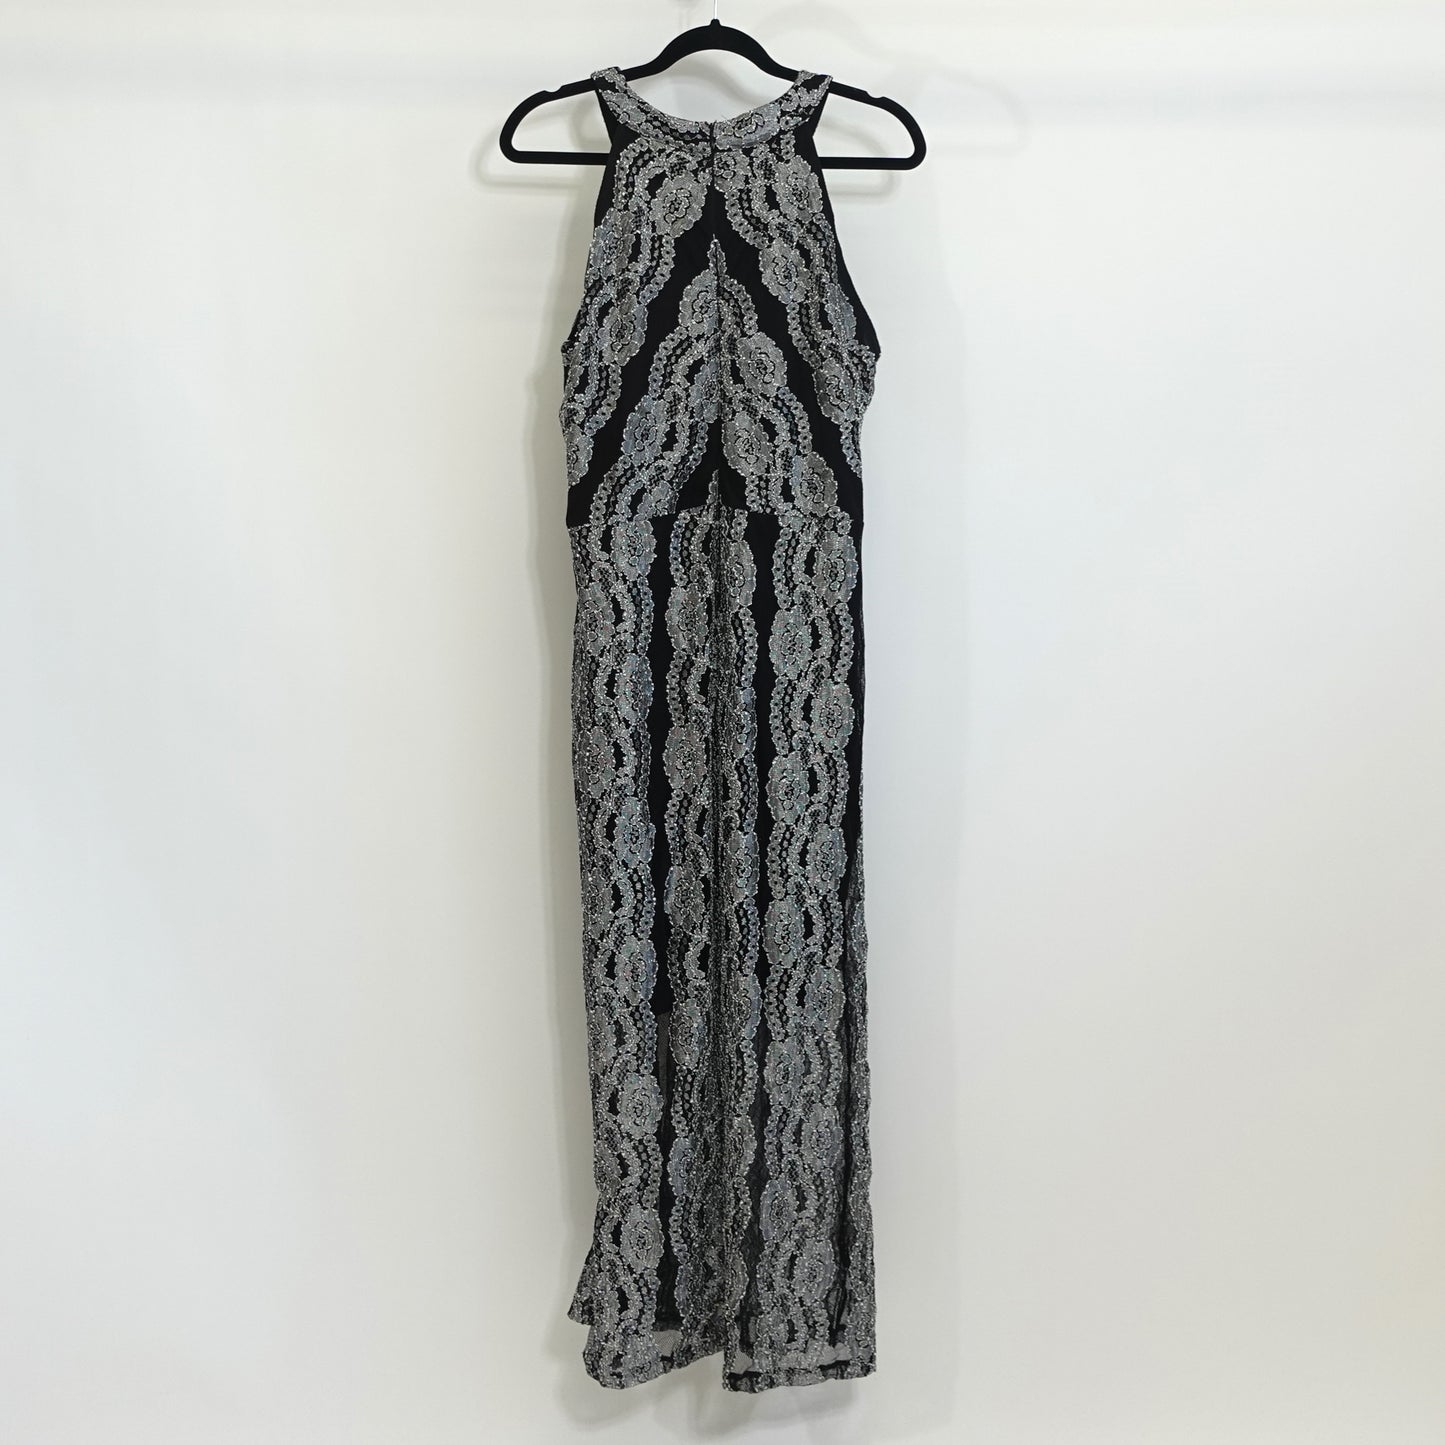 Black and Grey Lace Applique High Neck Dress